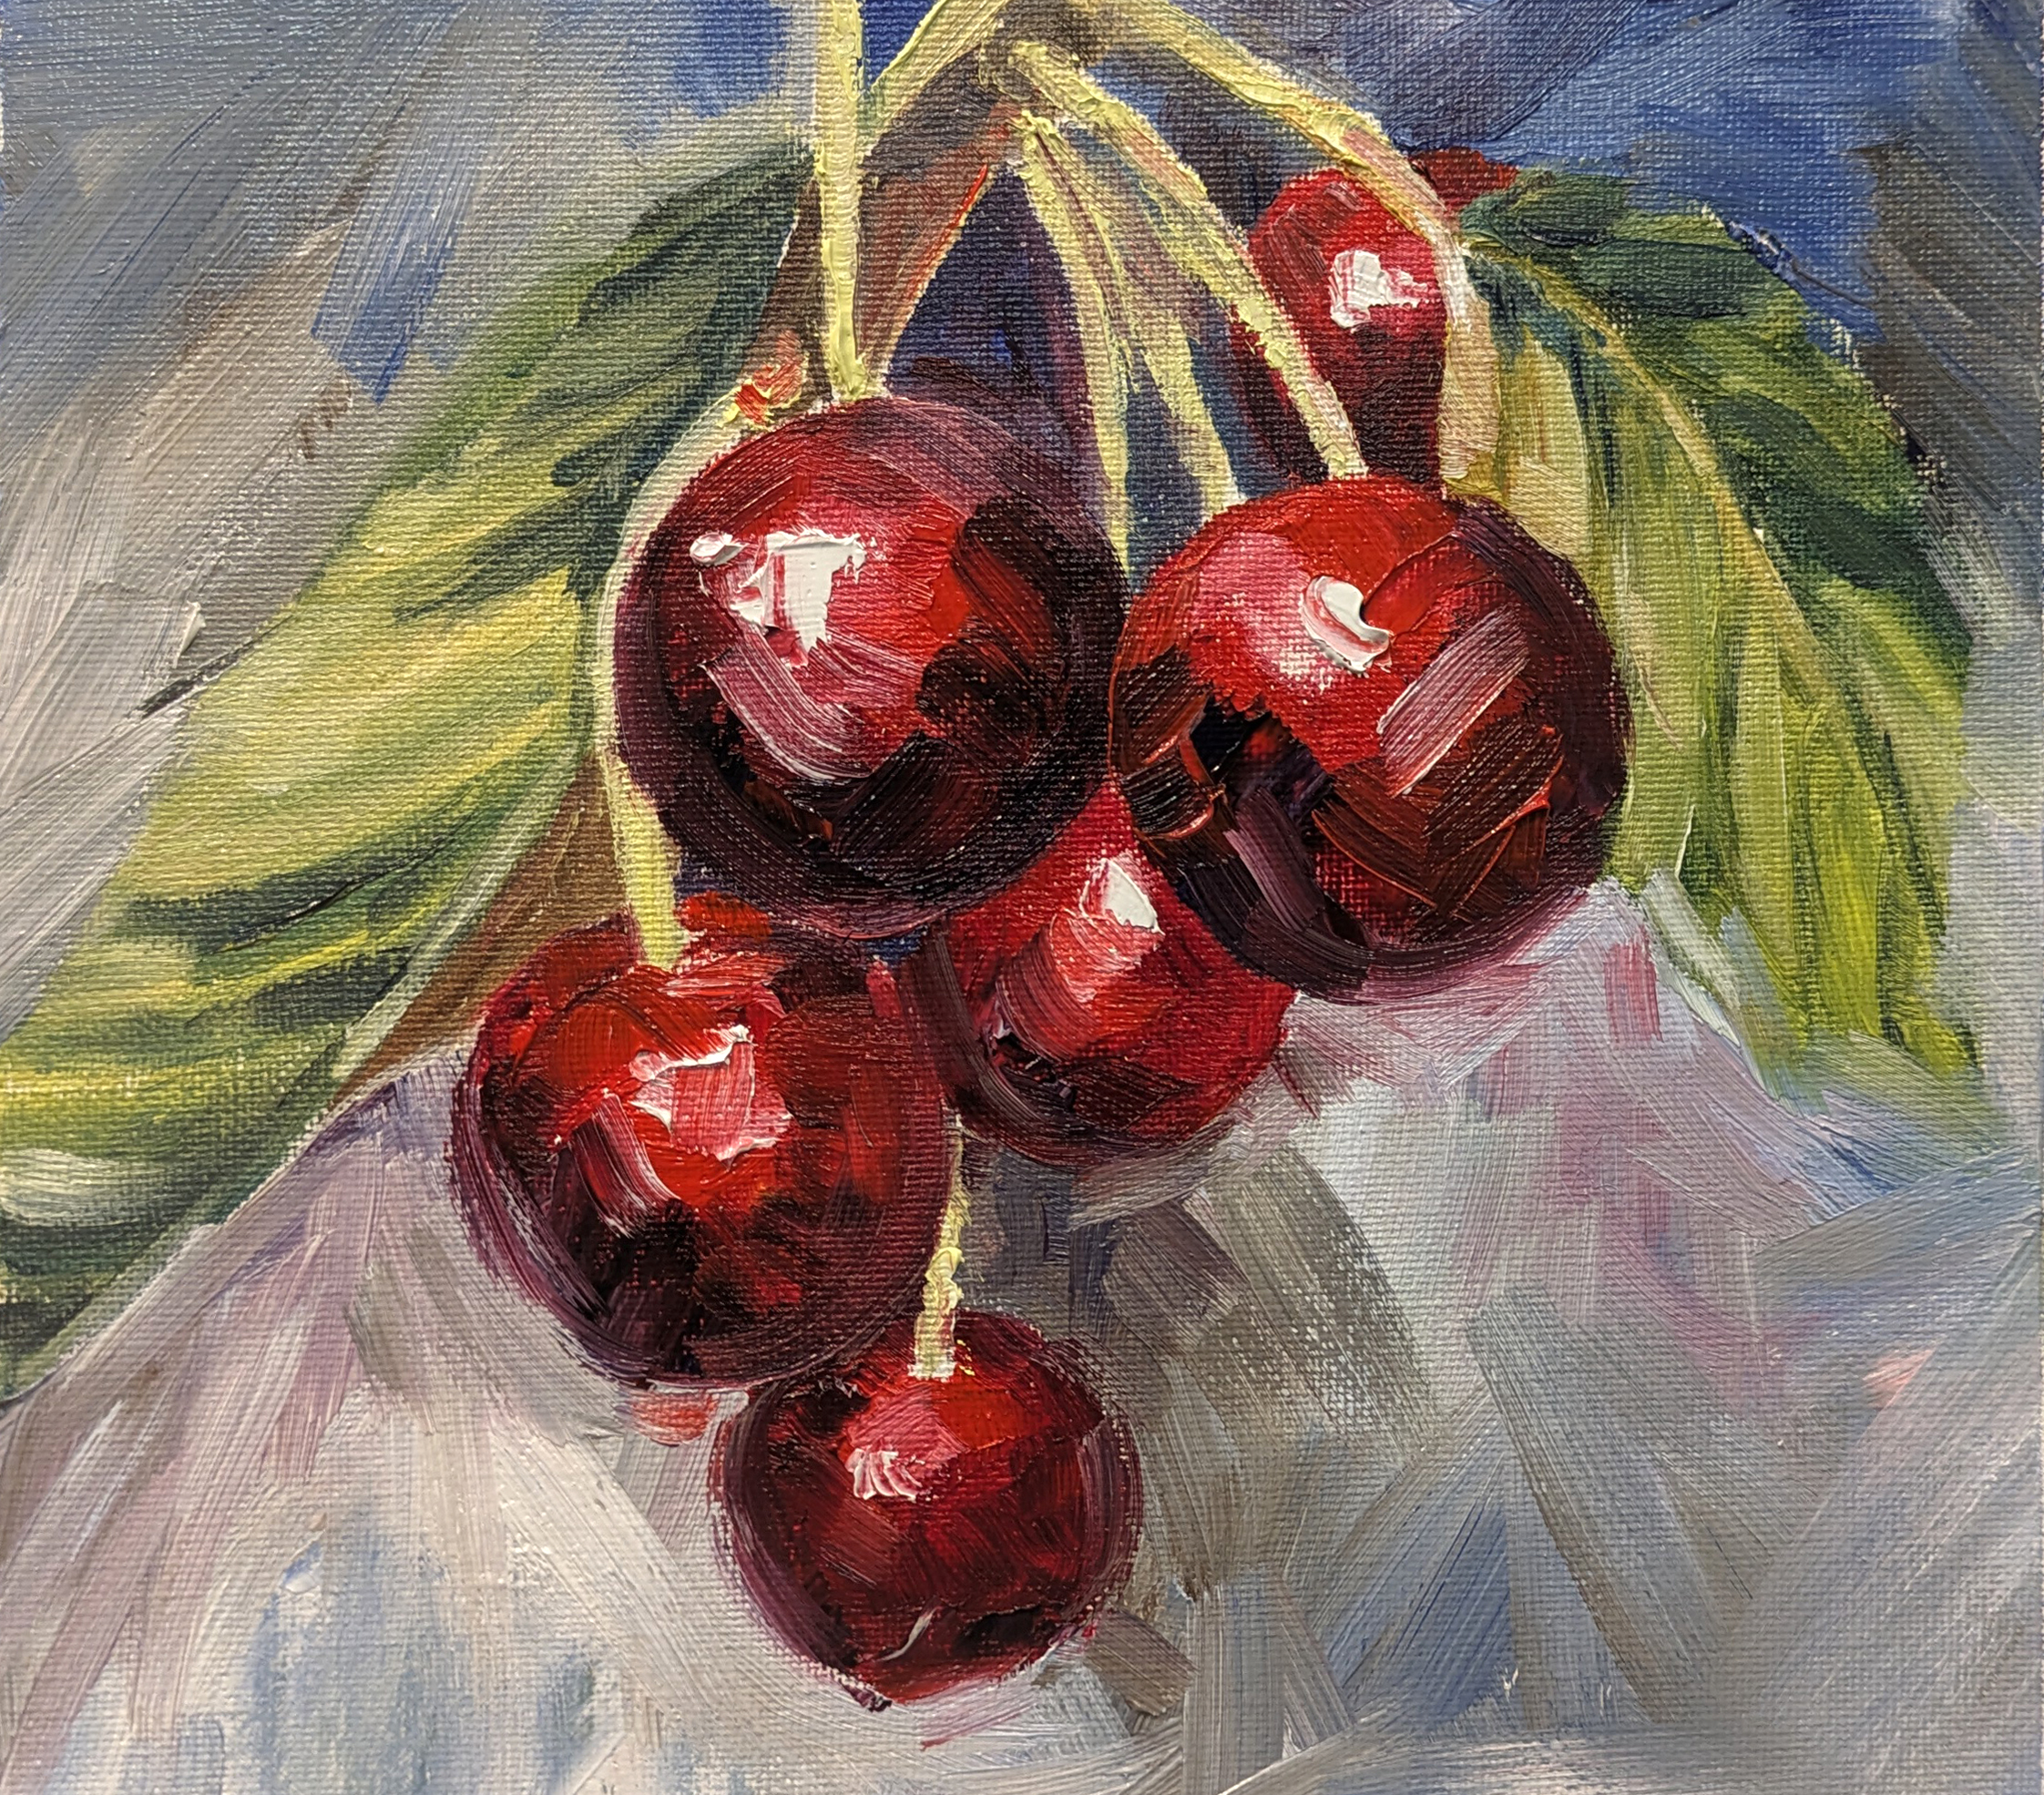 An loose oil painting of a bunch of cherries with visible brushstrokes and texture - colours of July